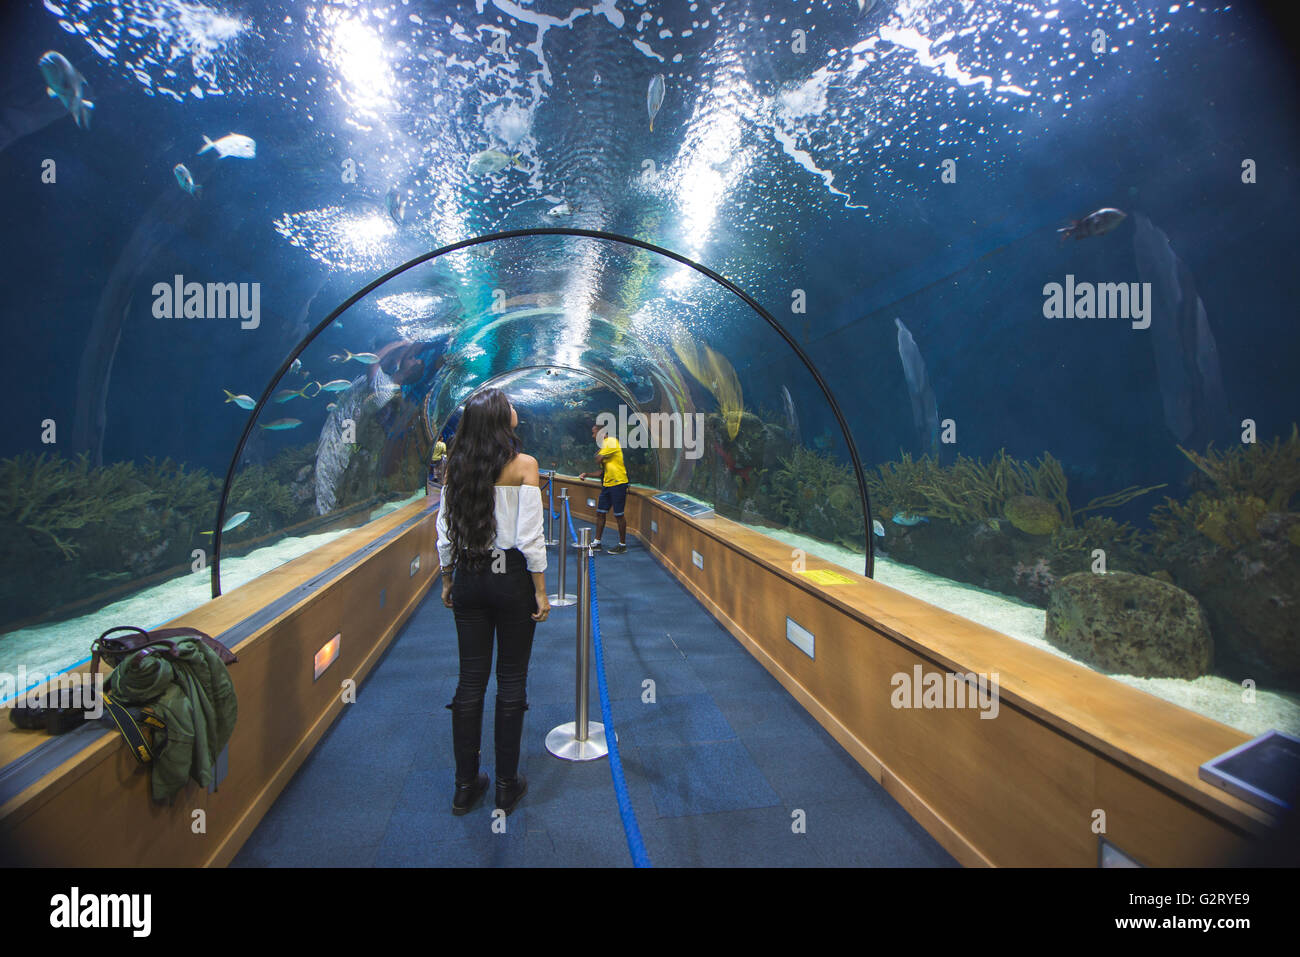 A young woman looking up and inside the aquarium of the L'Oceanografic, Valencia, Spain. Stock Photo